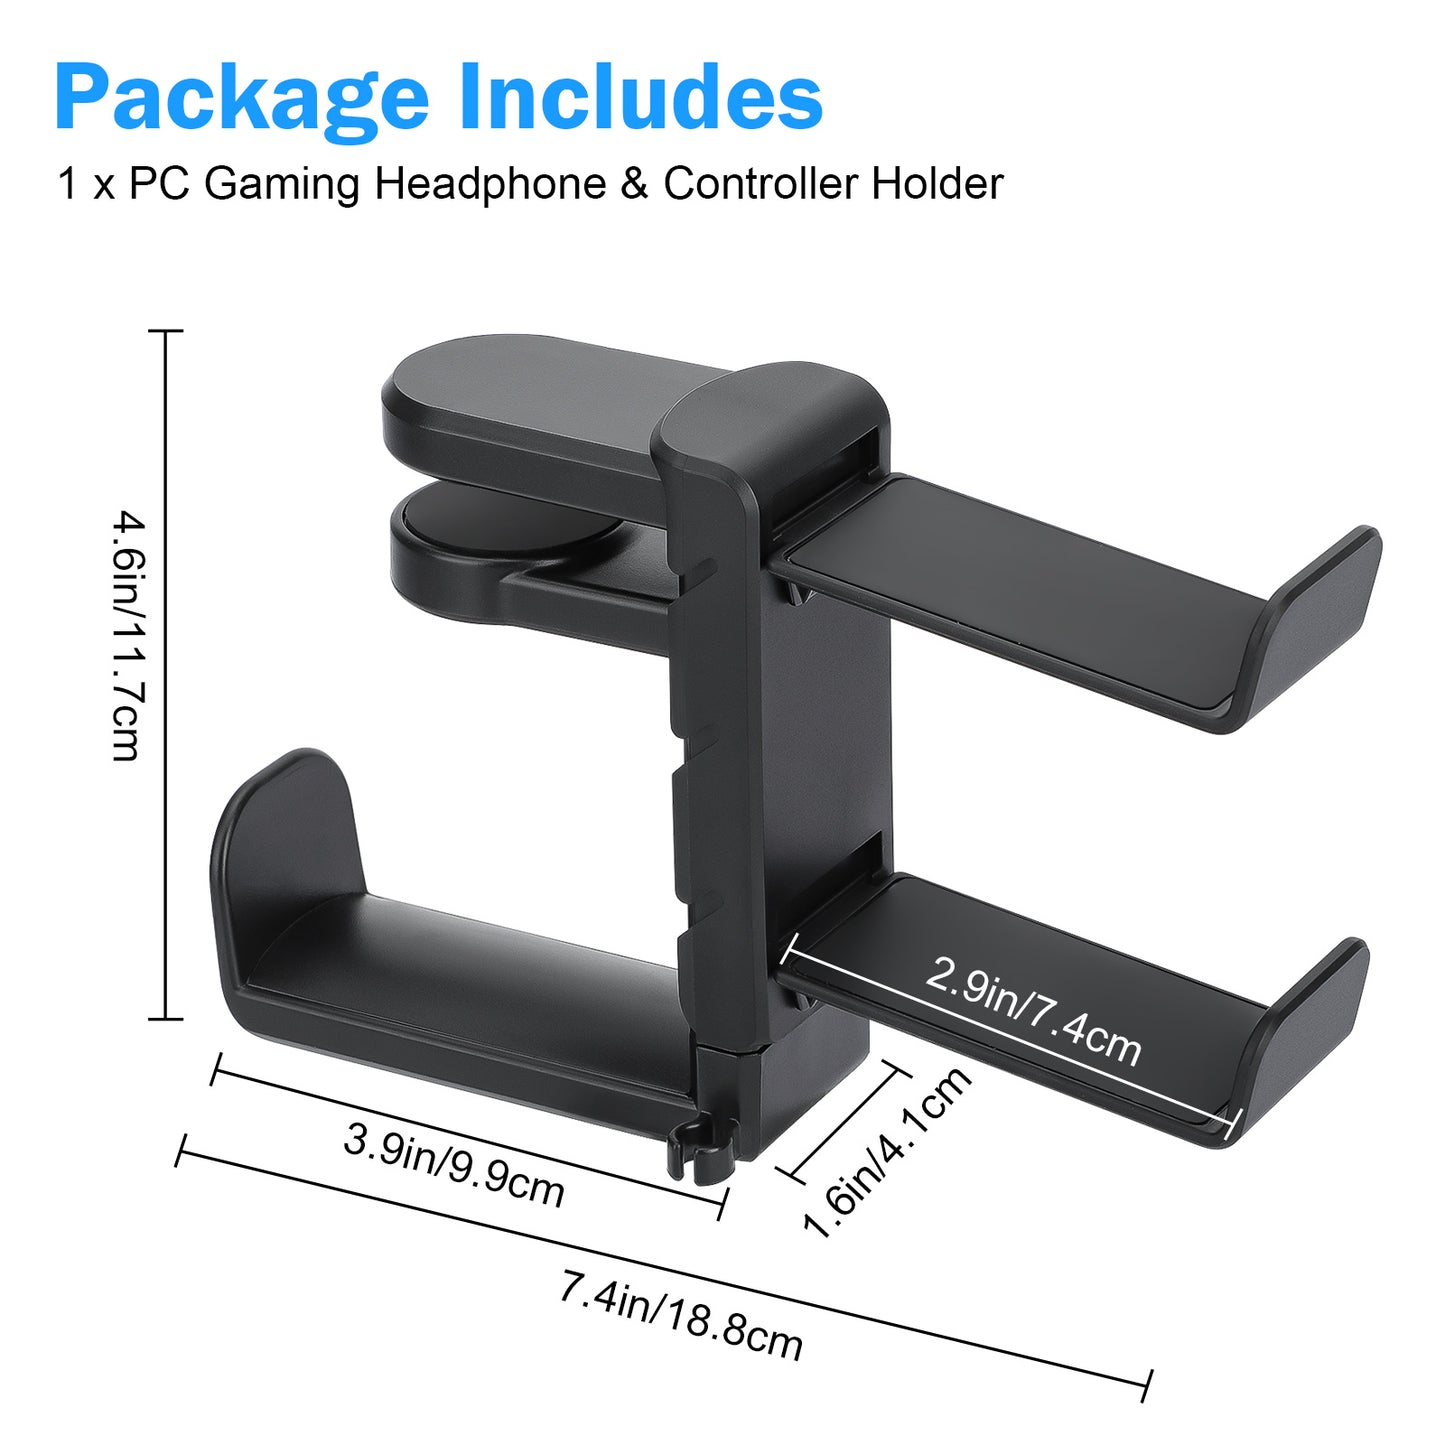 3-In-1 360° Rotating Headphone & Controller Stand Holder - Headphones Hanger Adjustable & Rotating Arm Clamp,Headphone Stand Under Desk, Universal Headset Controllers Hook With Cable Organizer (Black)